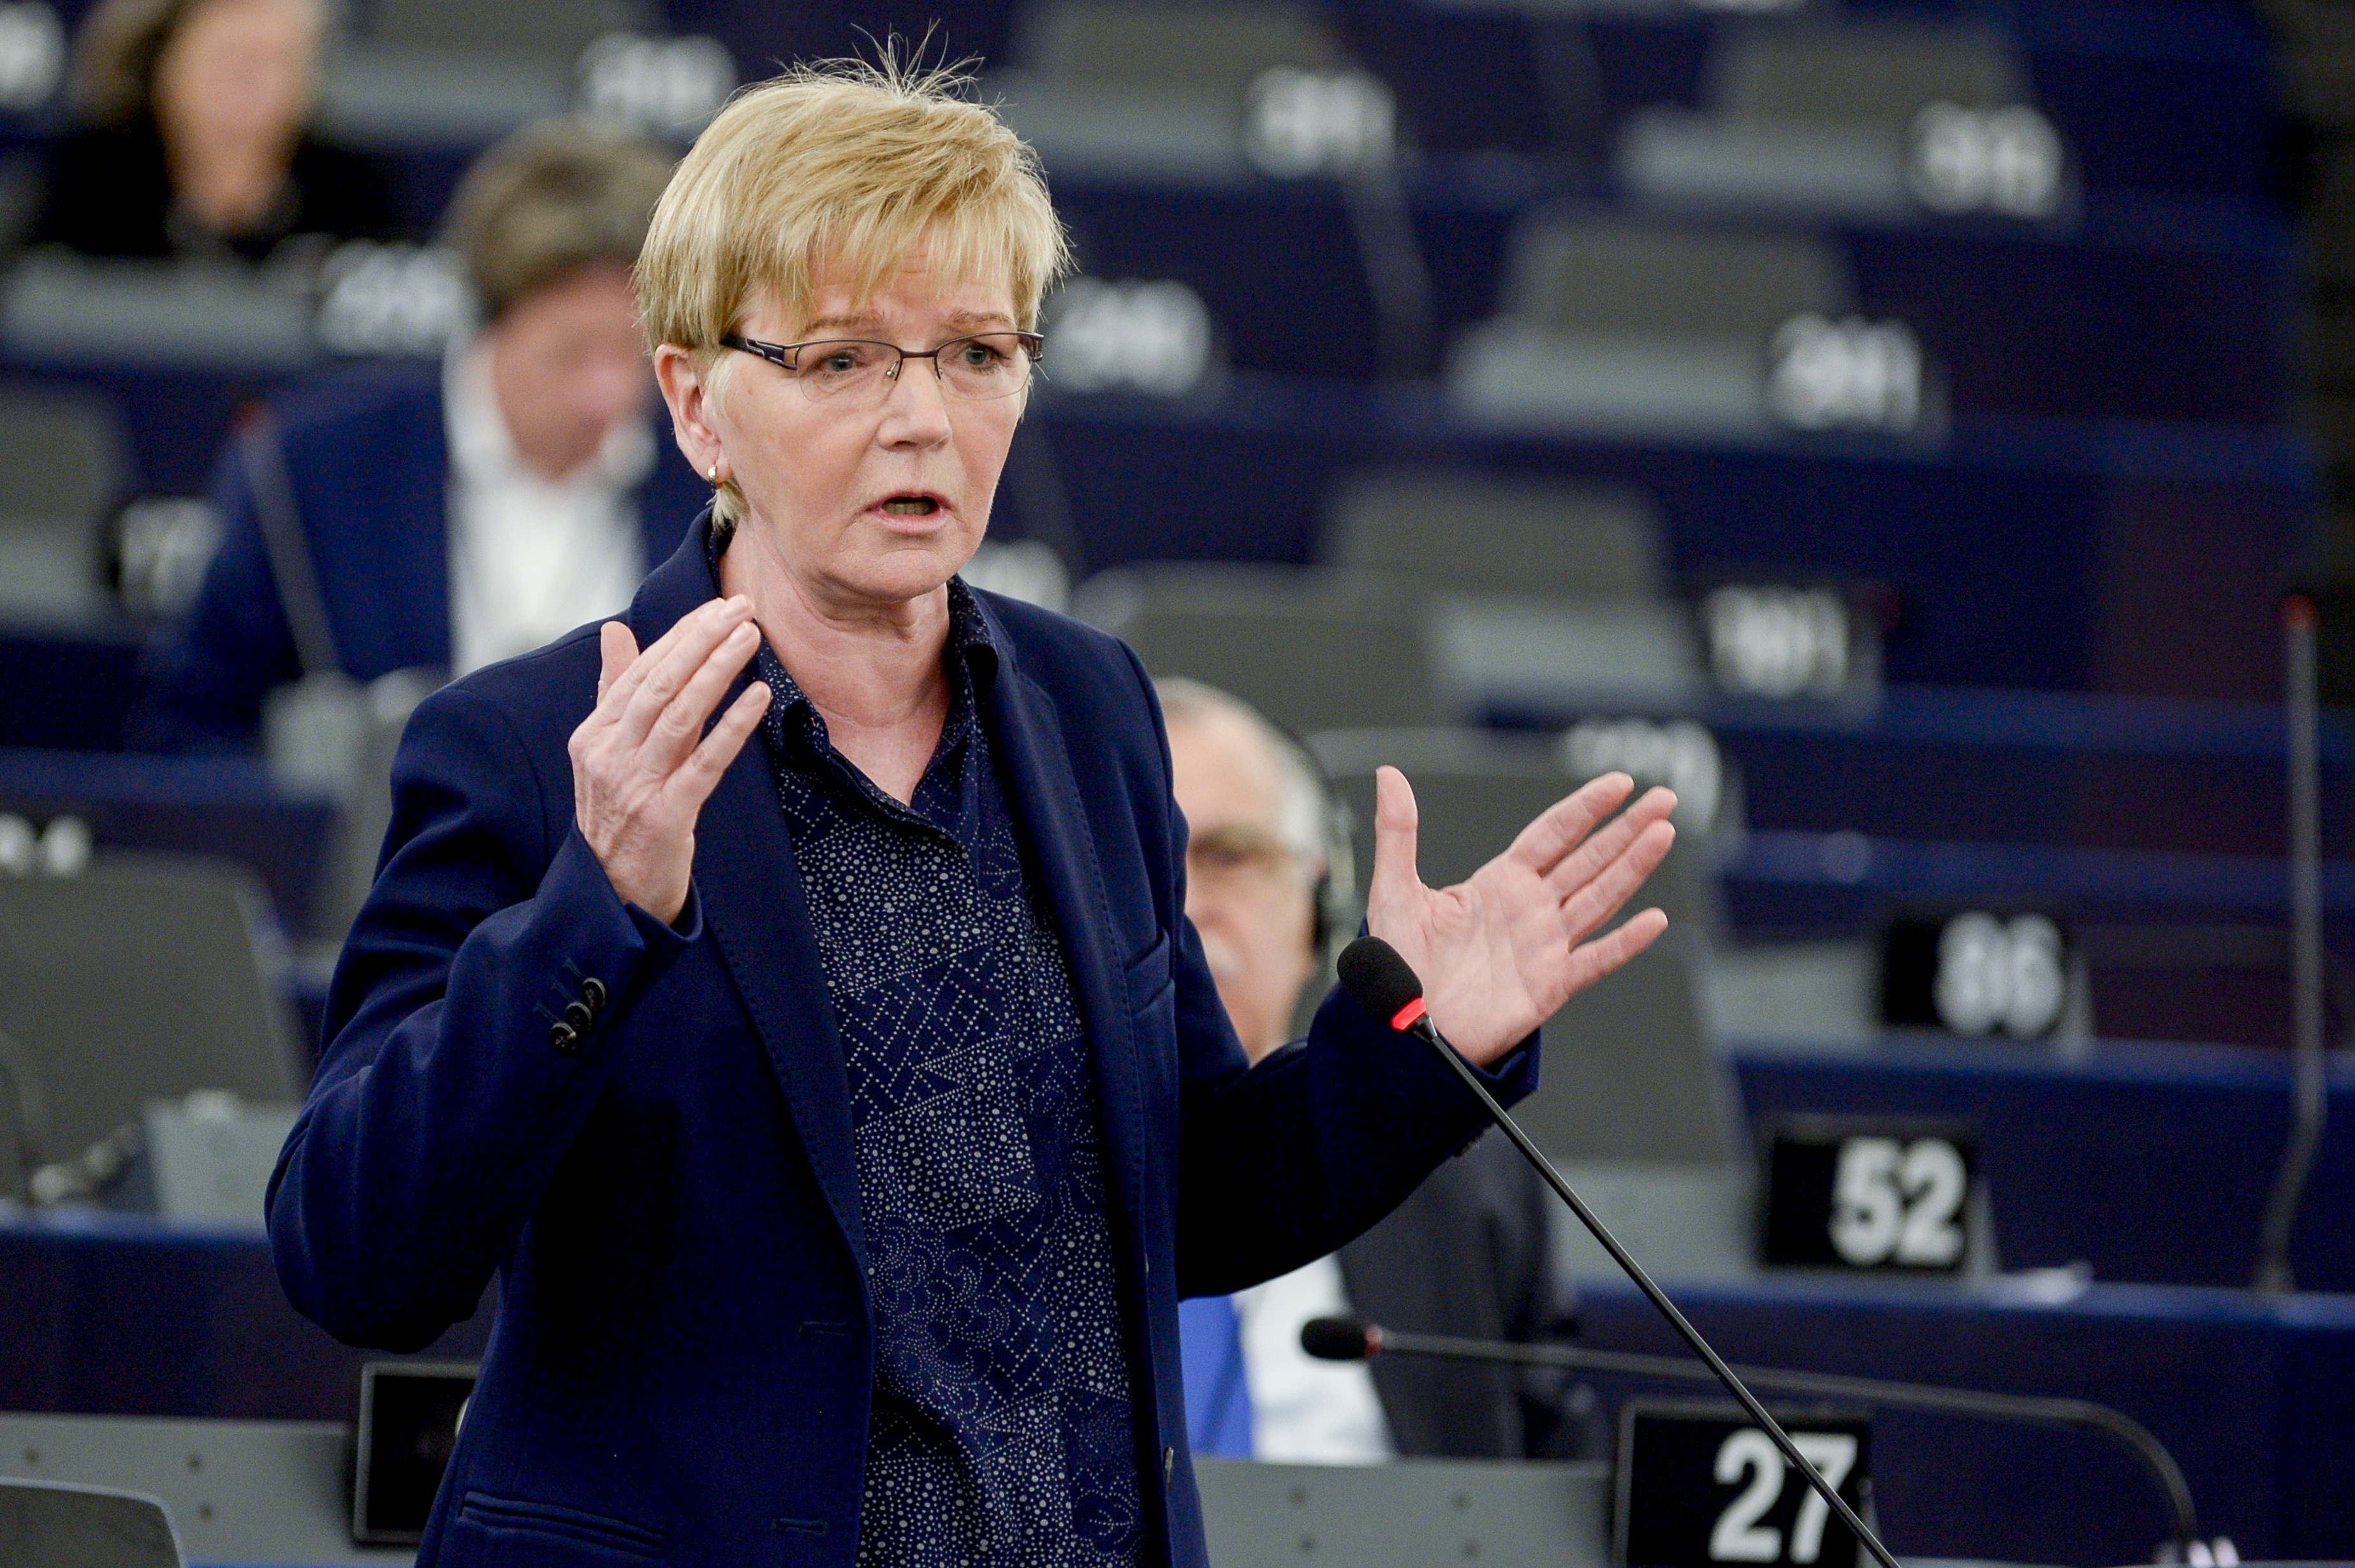 GUE / NGL MEP, Gabriele Zimmer, addressing the European Parliament in Strasbourg (by ACN)